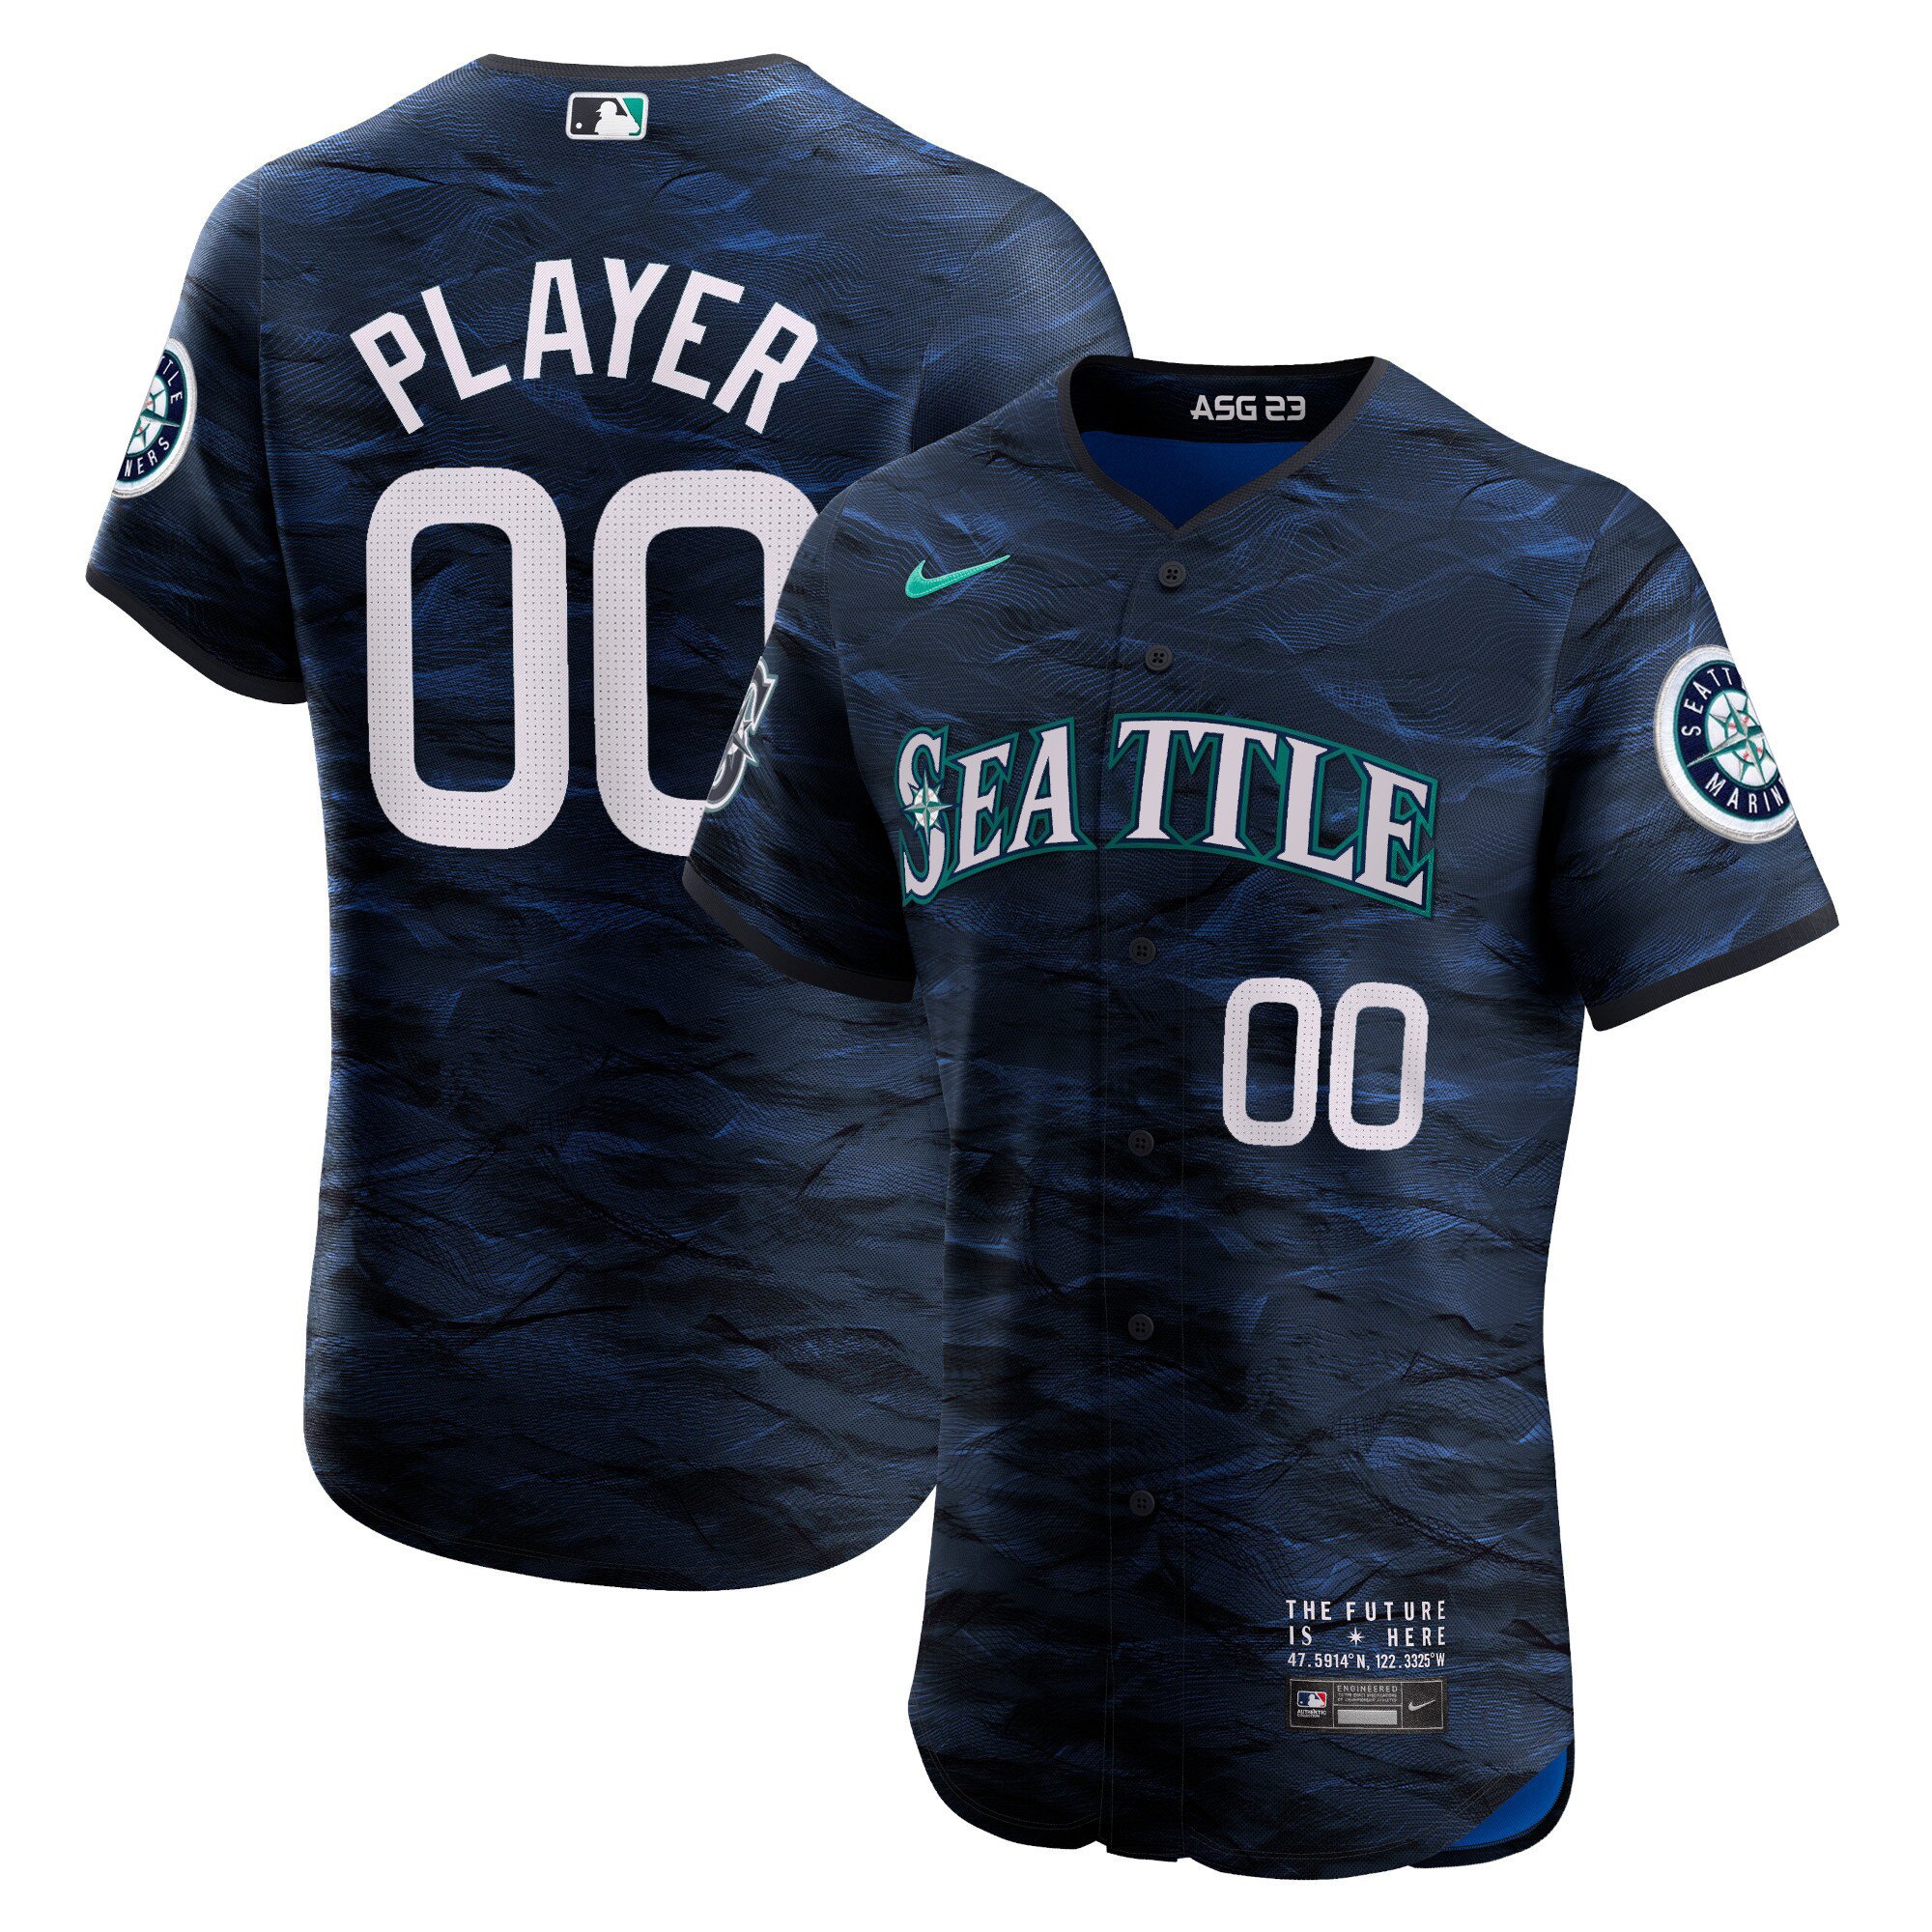 Kraken Jersey Customization - Add patches and Sleeve Numbers?